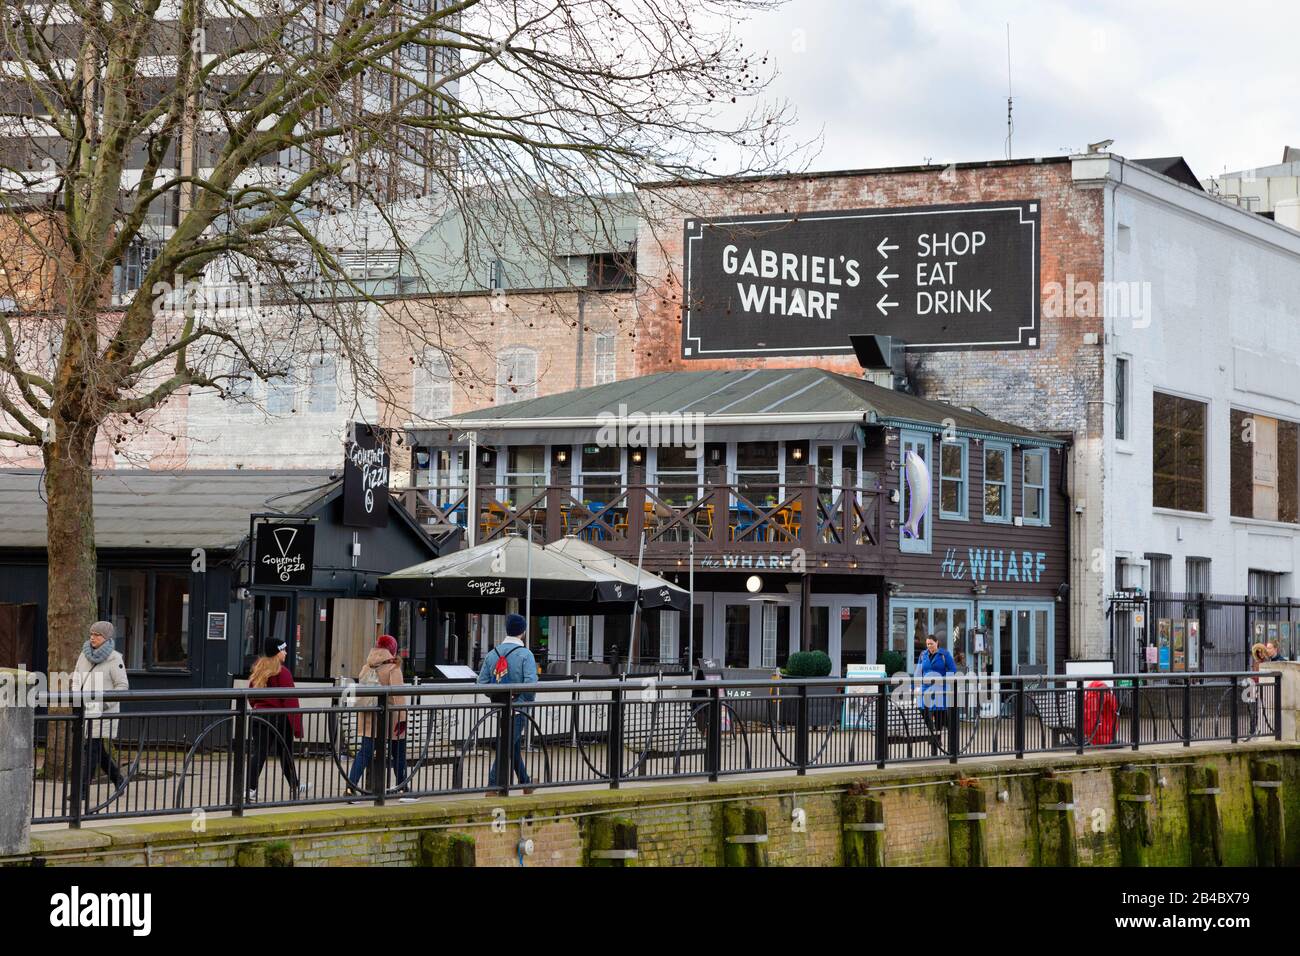 Gabriels Wharf, South Bank London - scene in March, early spring, South Bank London UK Stock Photo